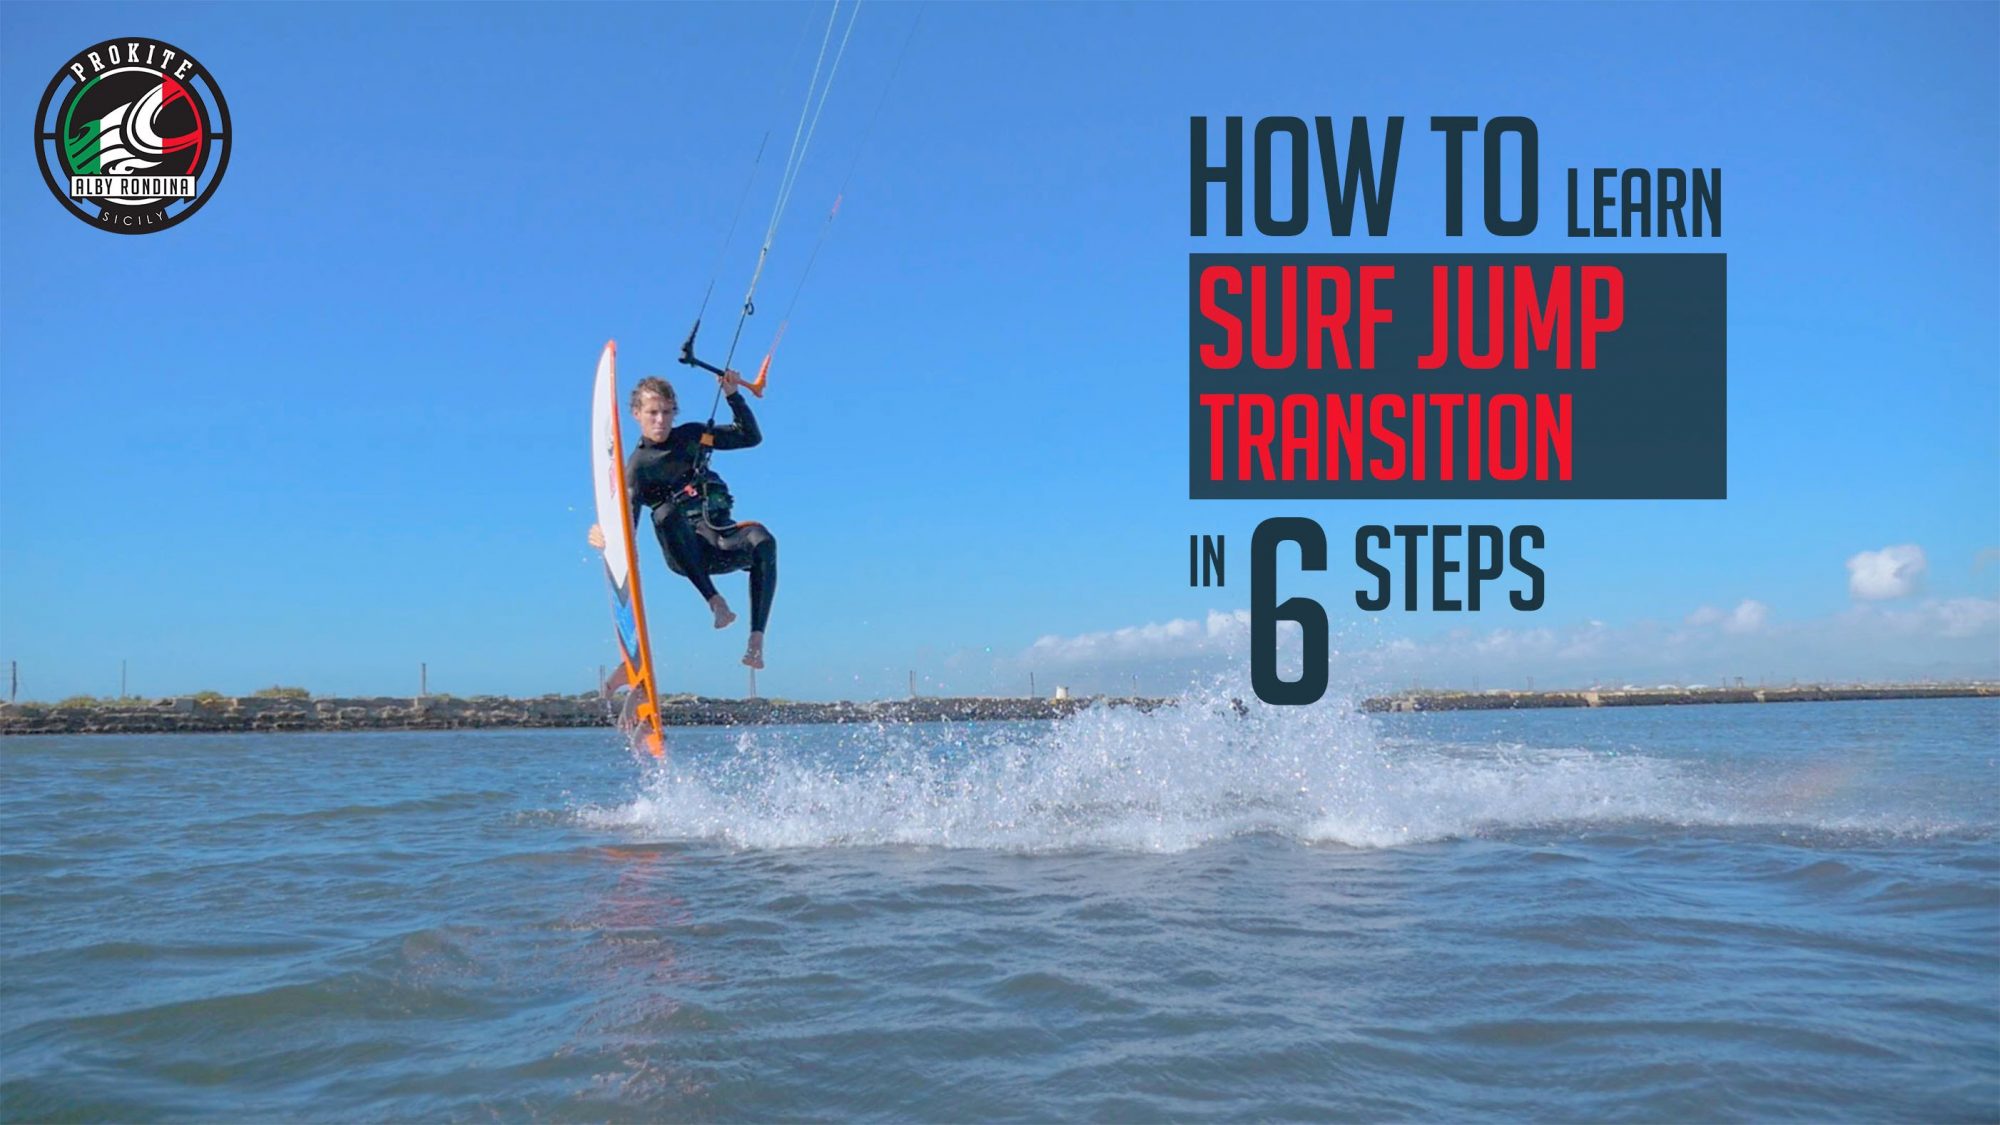 6 steps to learn strapless jump - 6 steps to Strapless Jump Transition